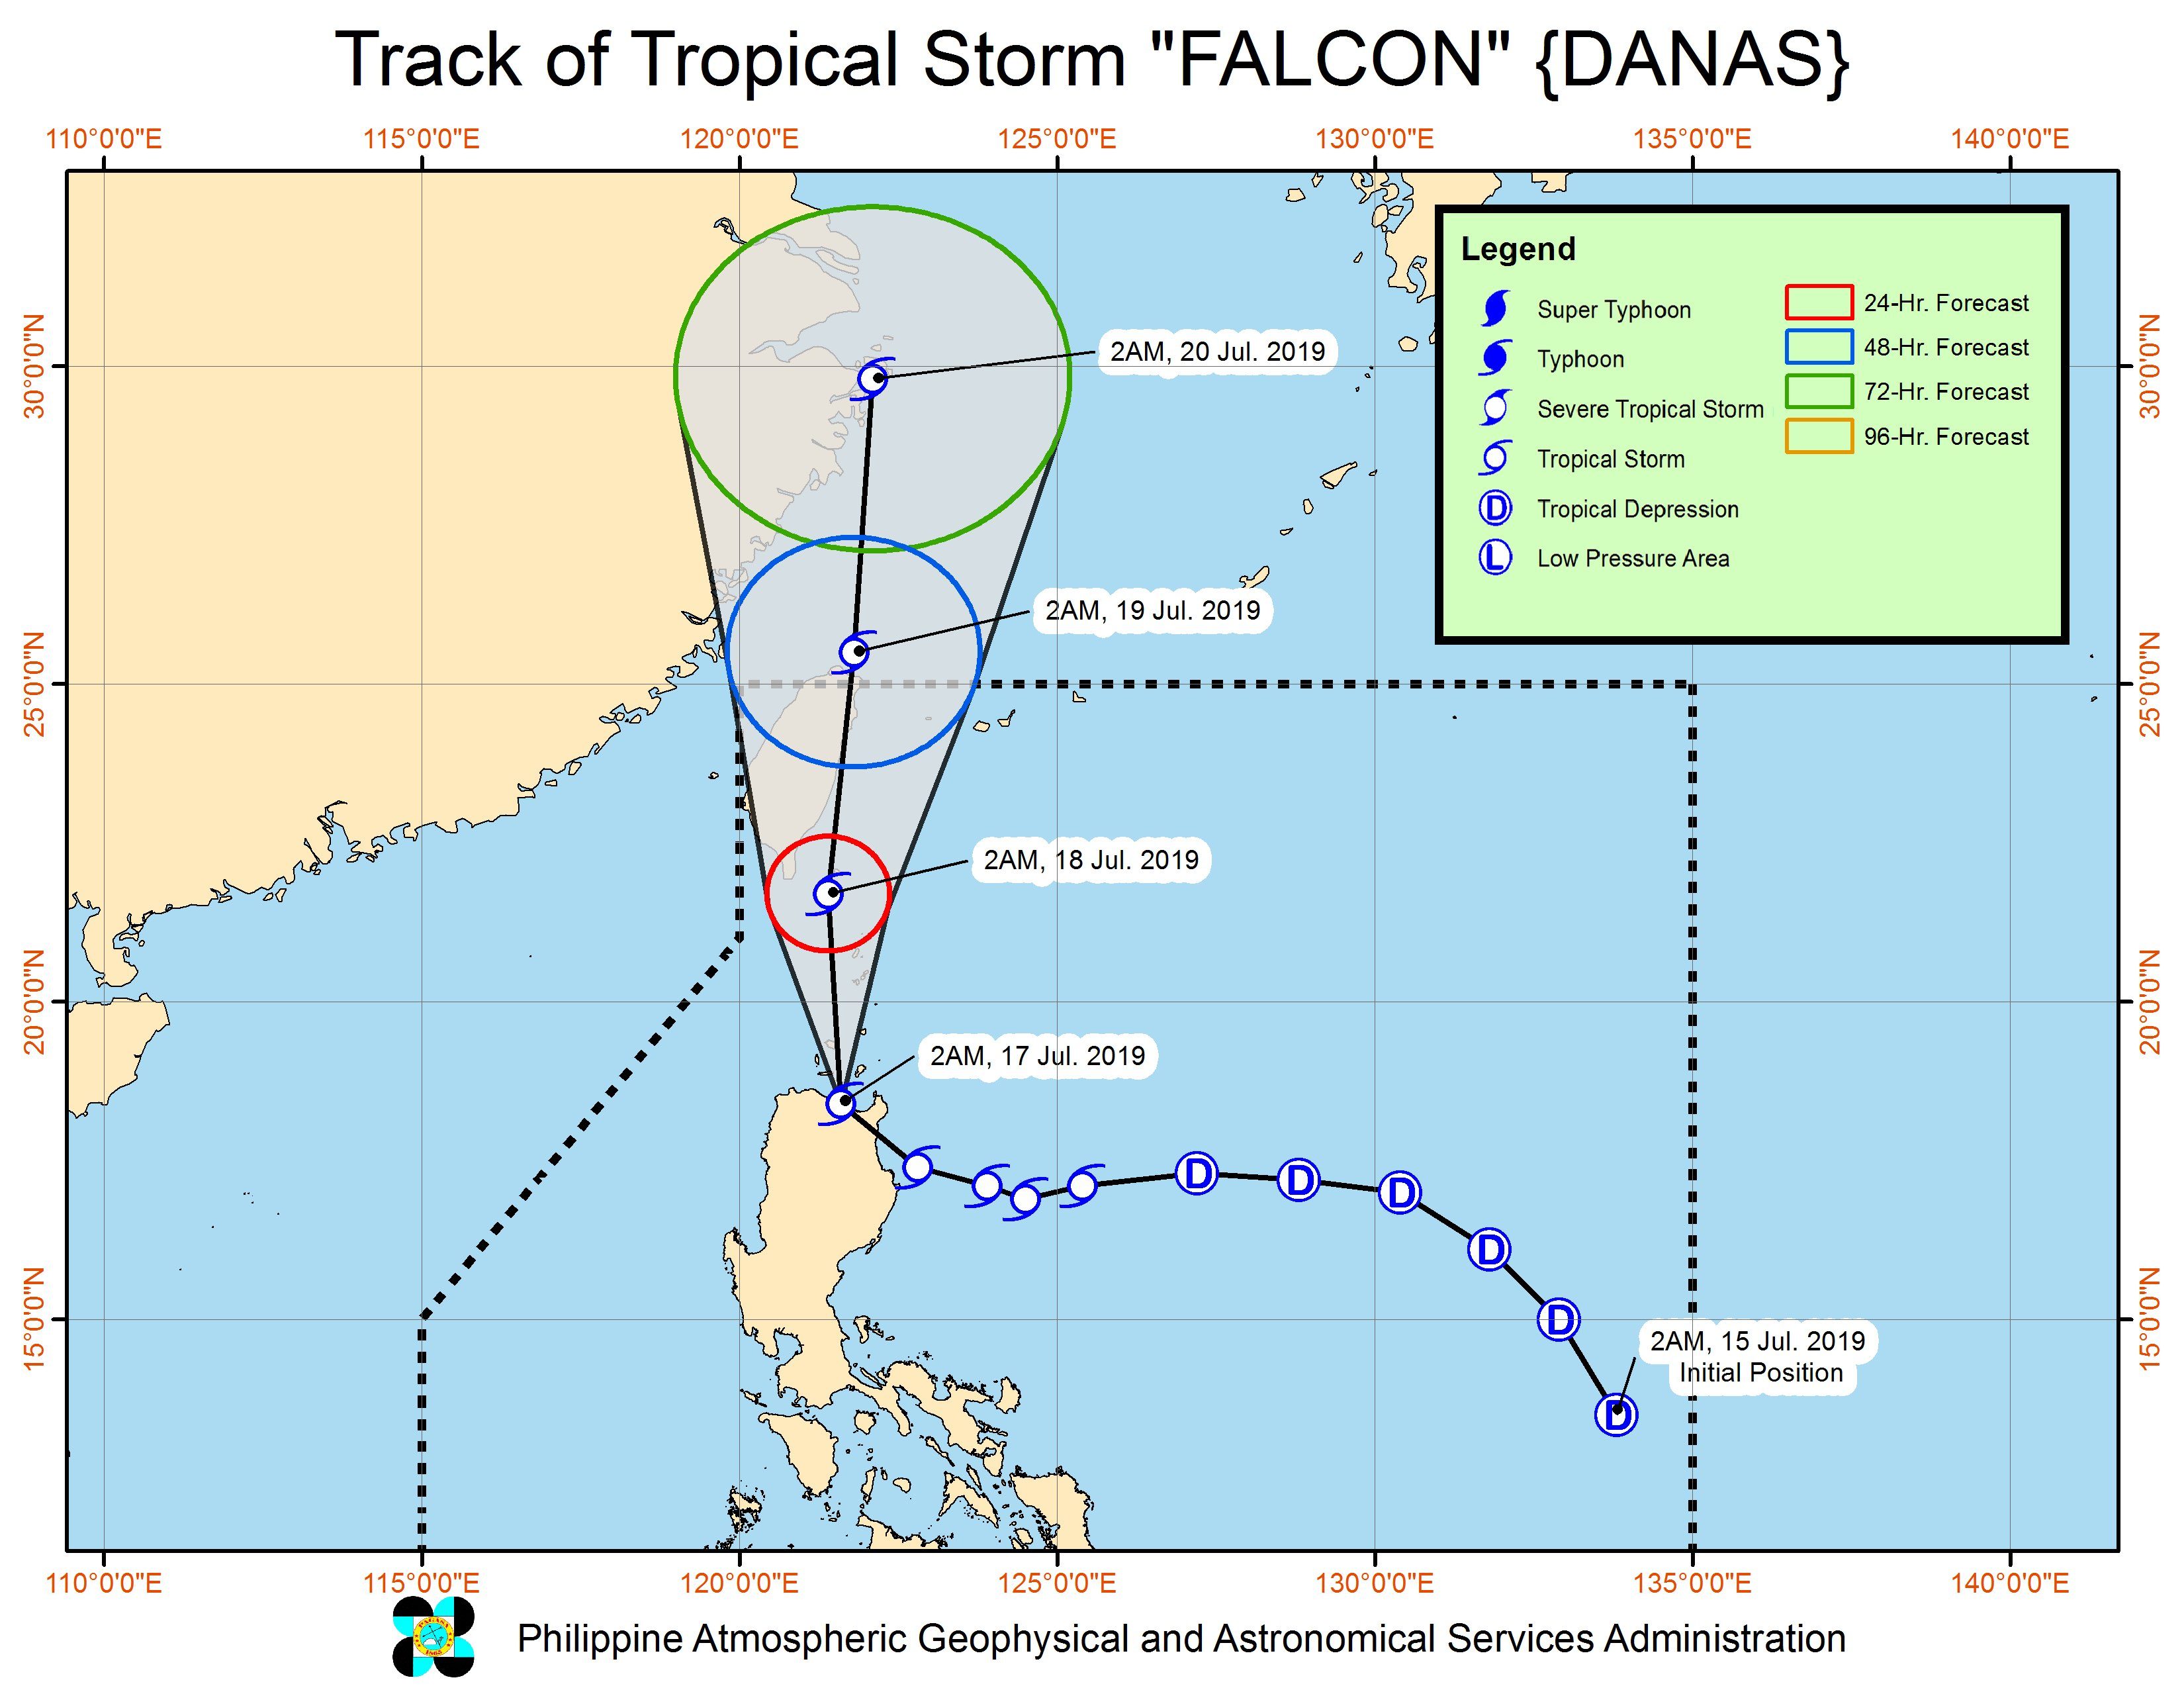 Forecast track of Tropical Storm Falcon (Danas) as of July 17, 2019, 5 am. Image from PAGASA 